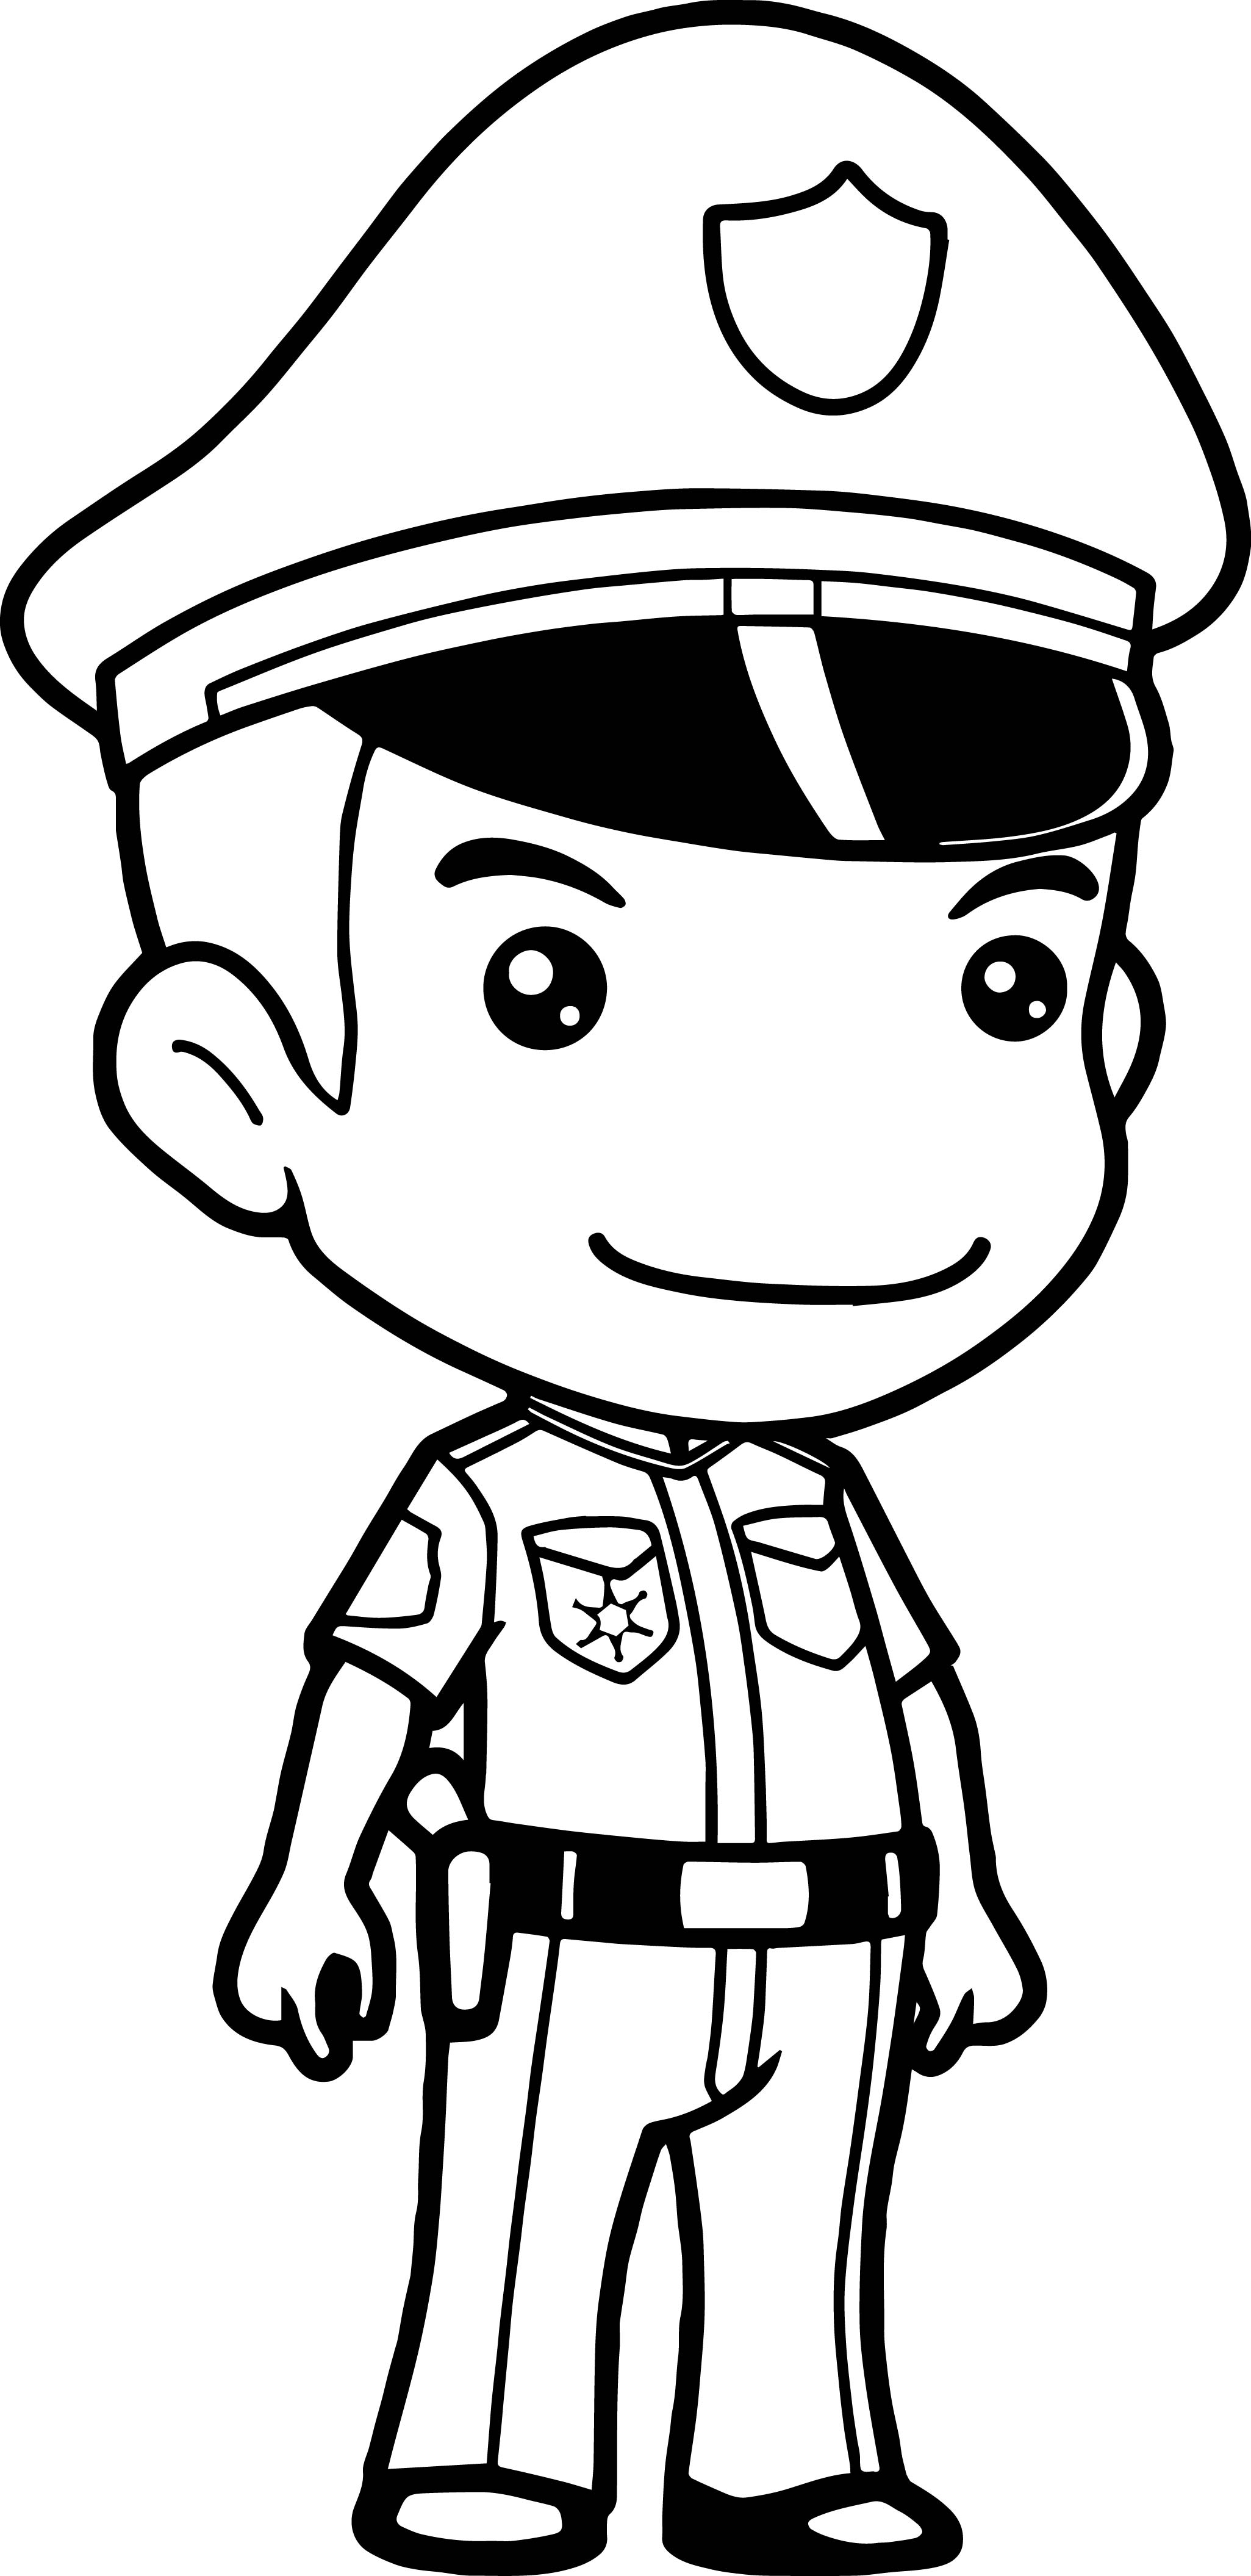 Police Officer Drawing at GetDrawings Free download